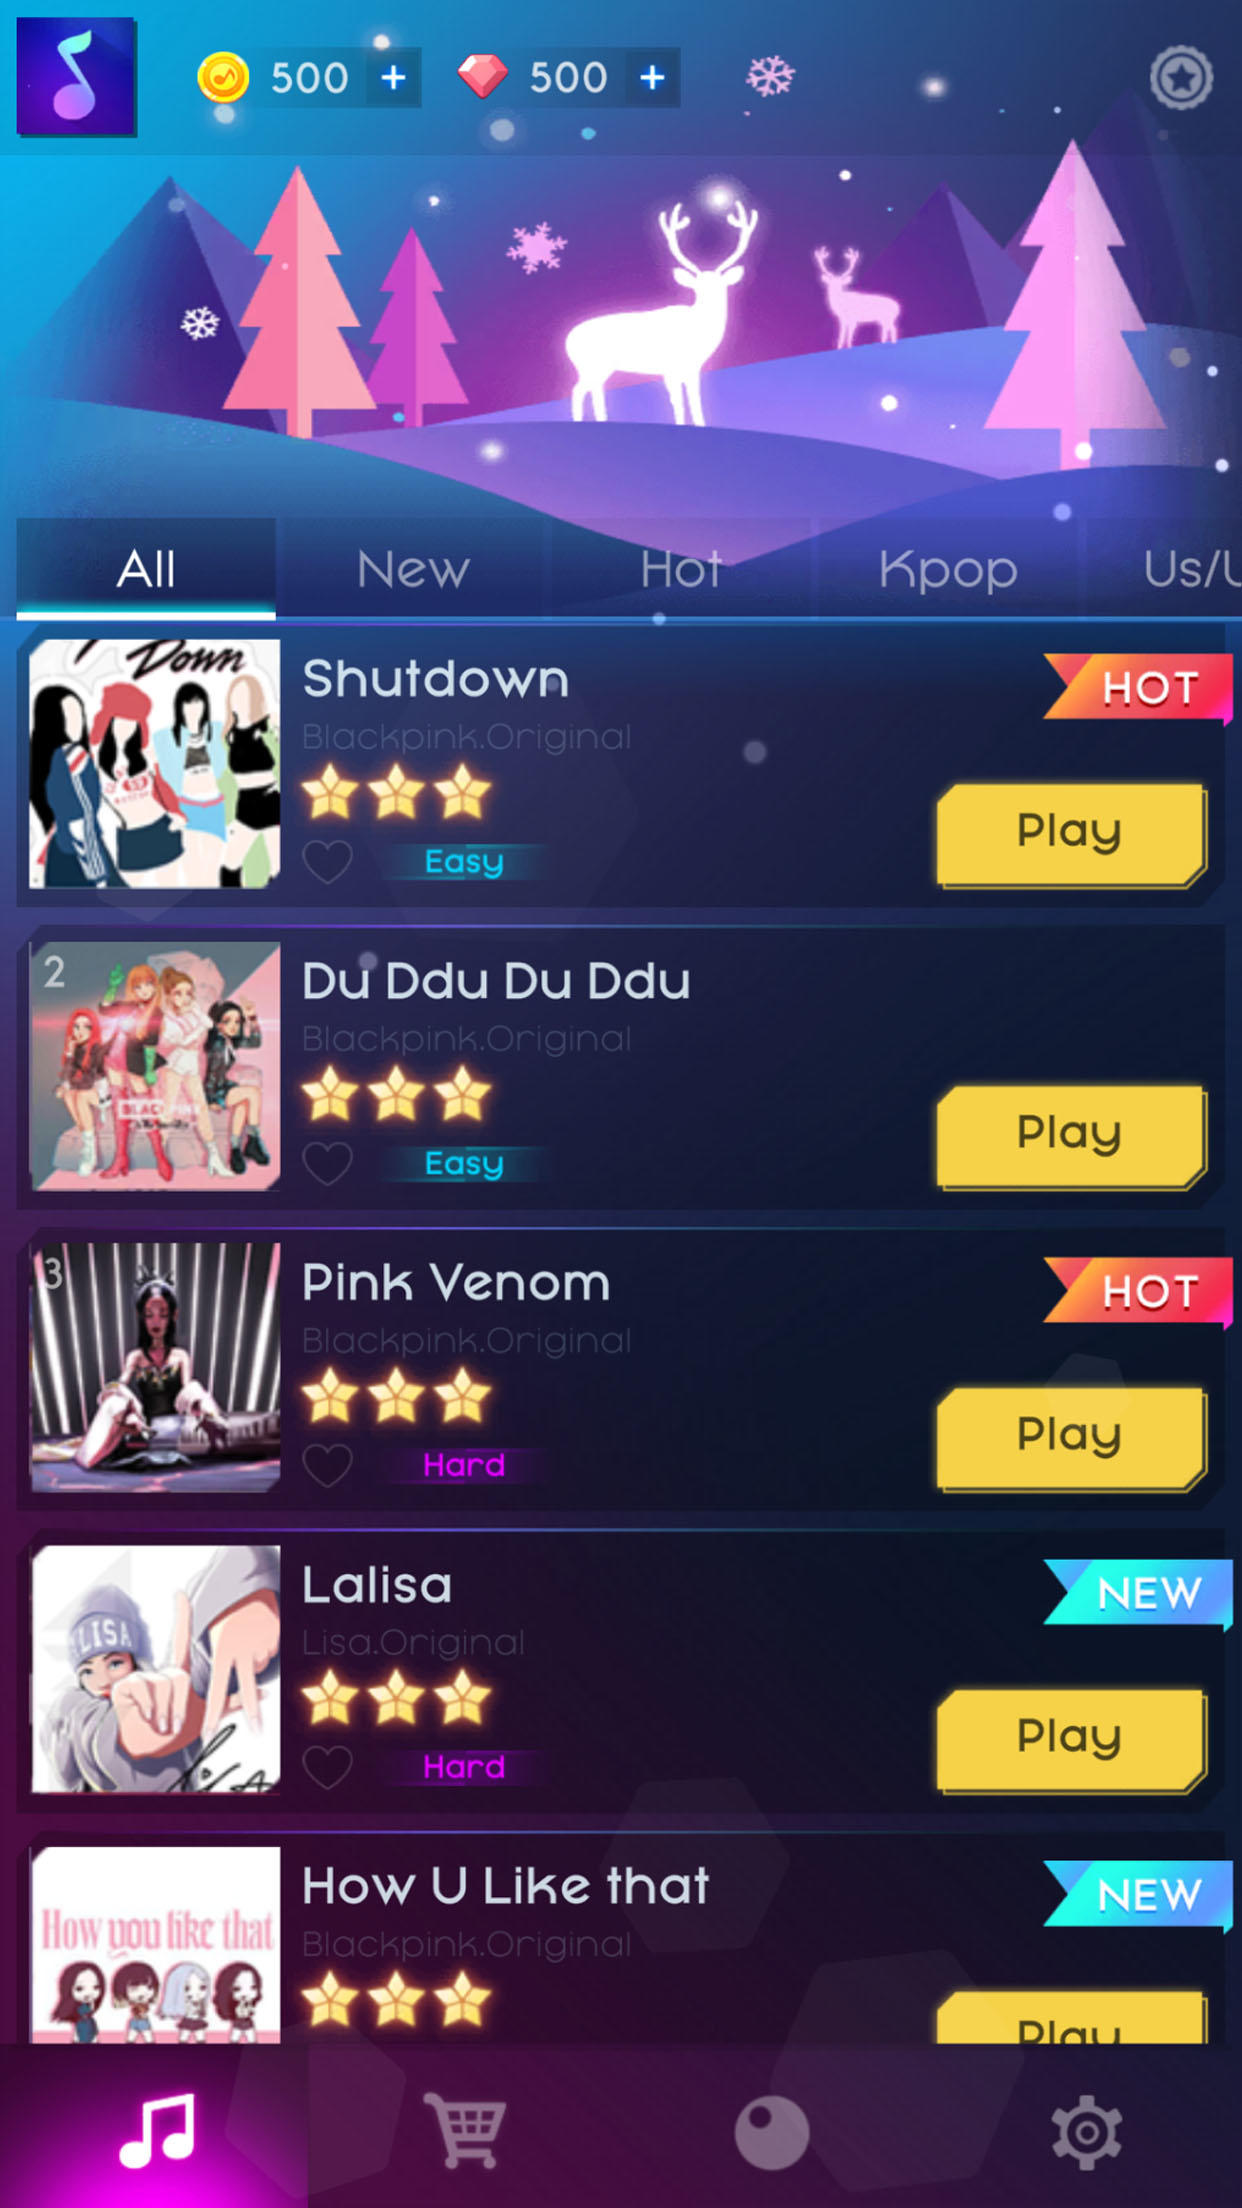 BLACKPINK The Game – Now Live for Android and iOS